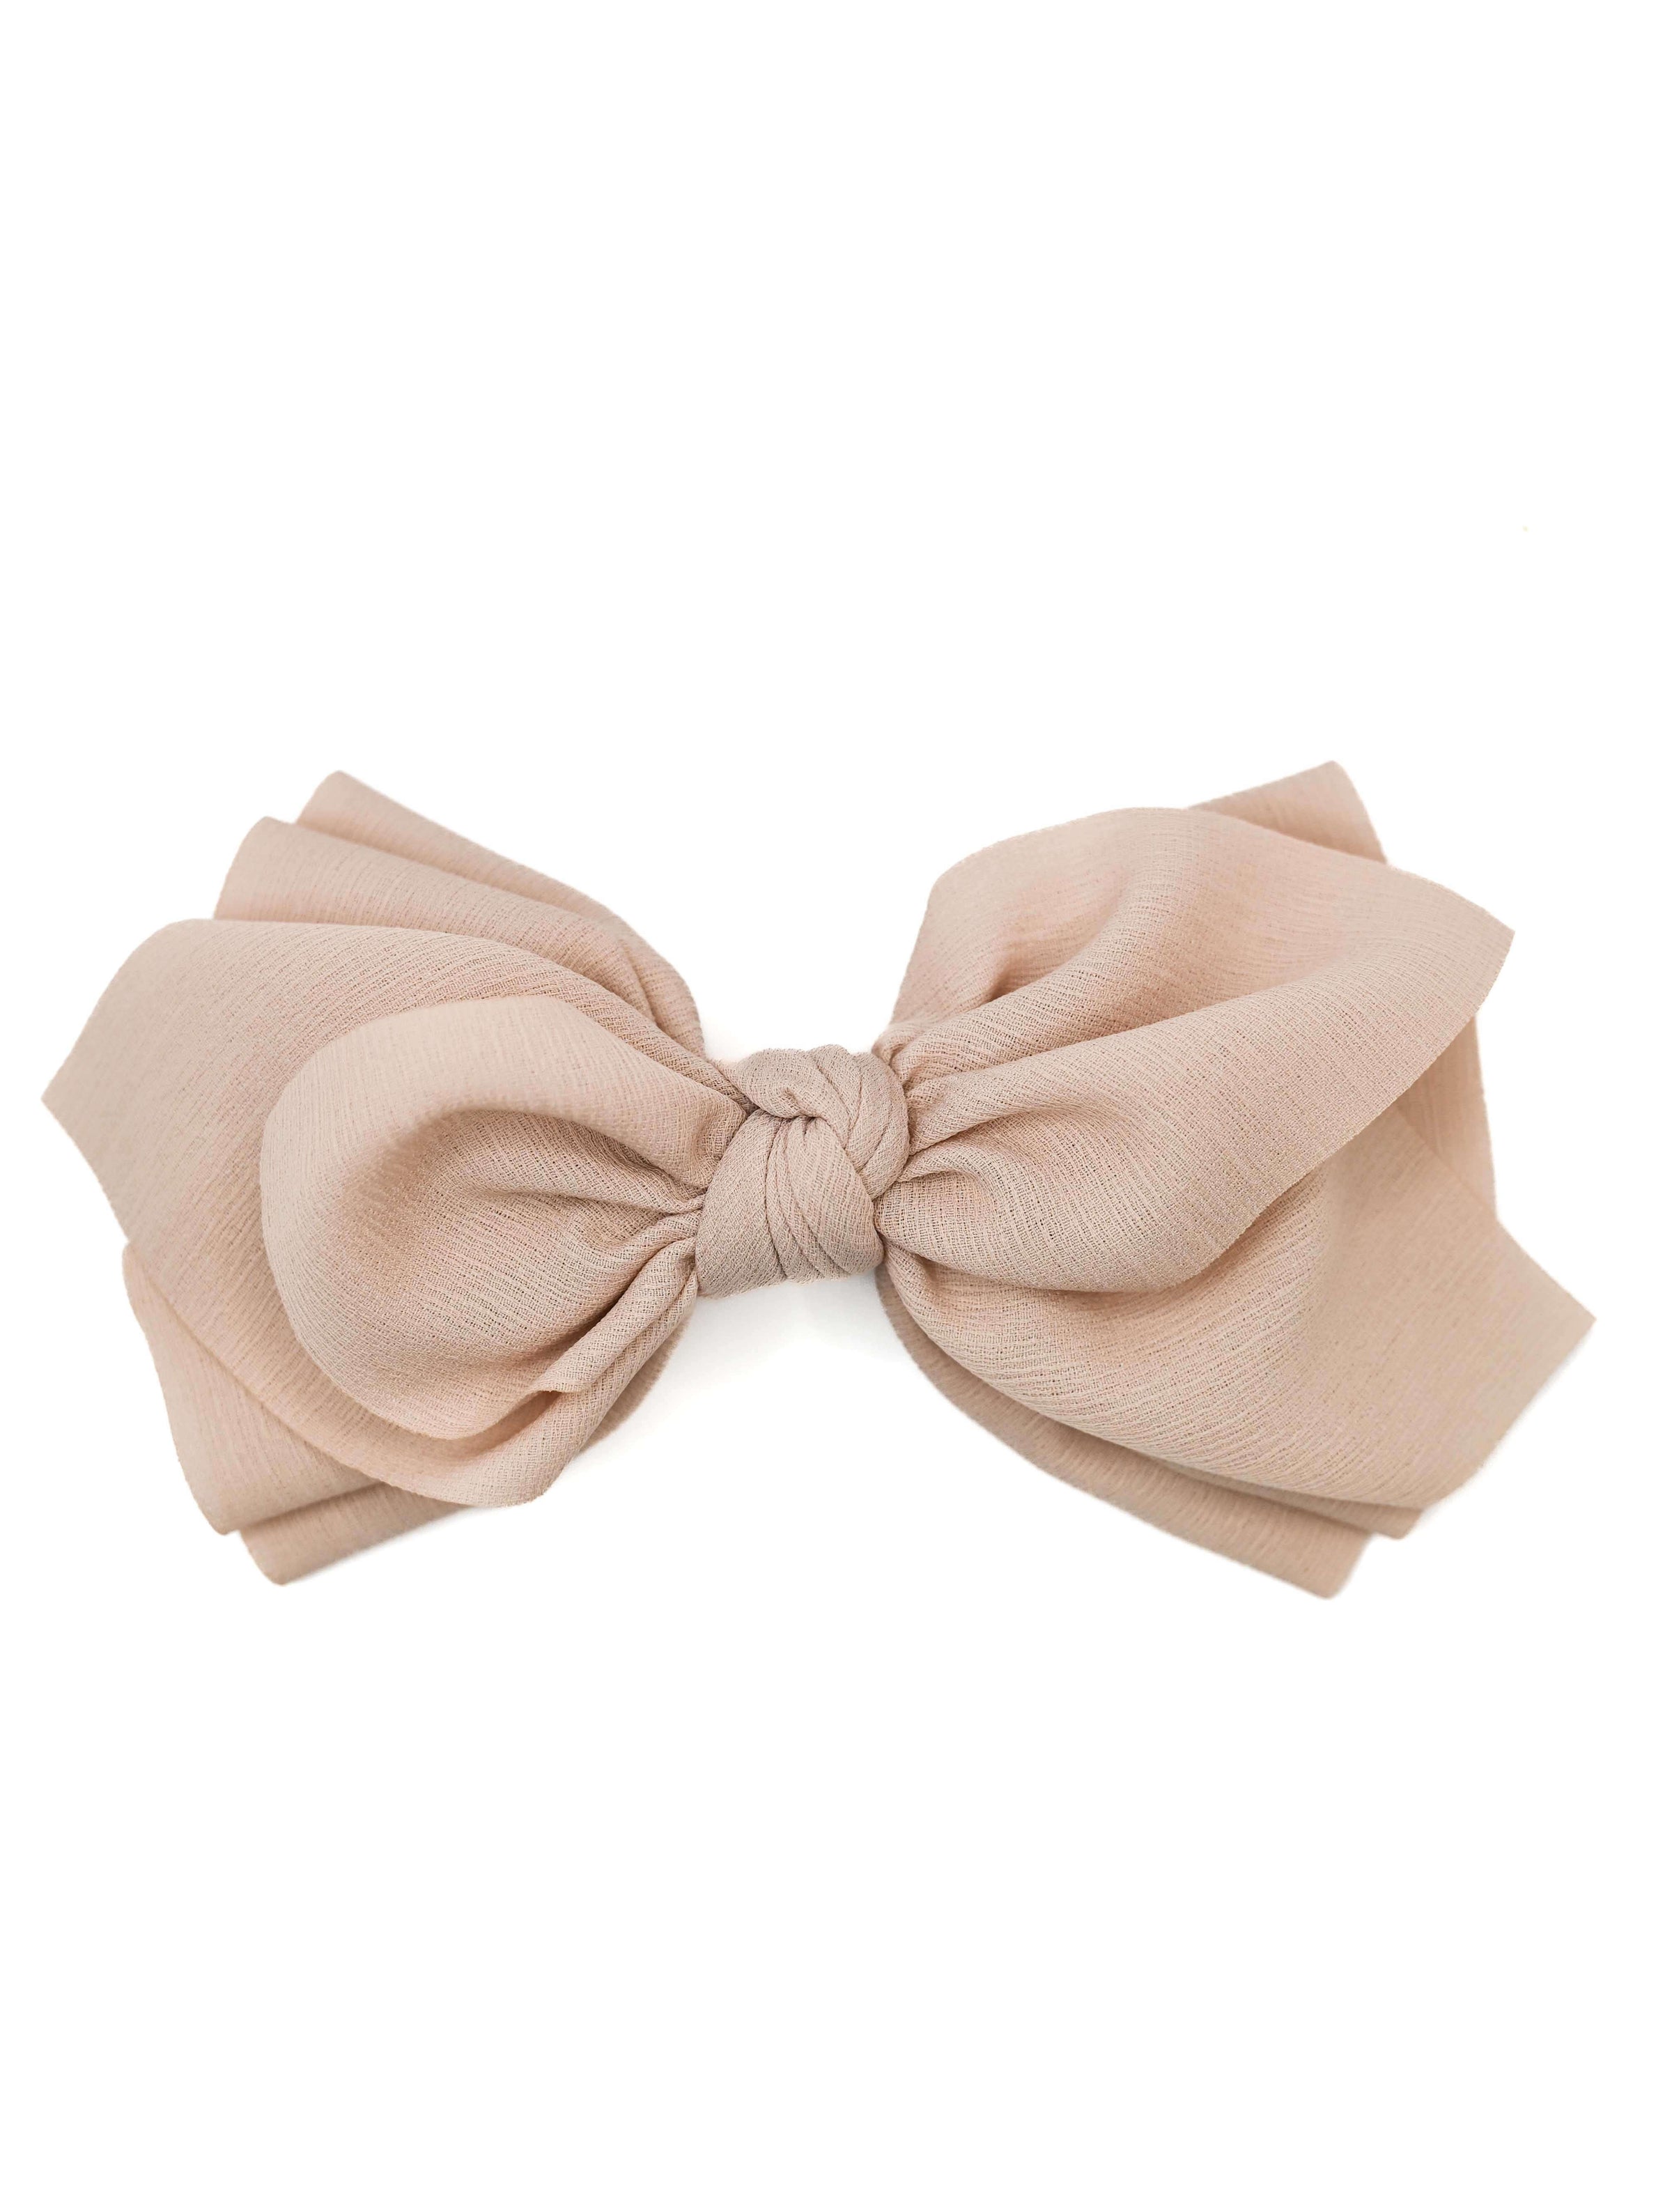 Multi Layered Knotted Bow Hair Clip in Beige